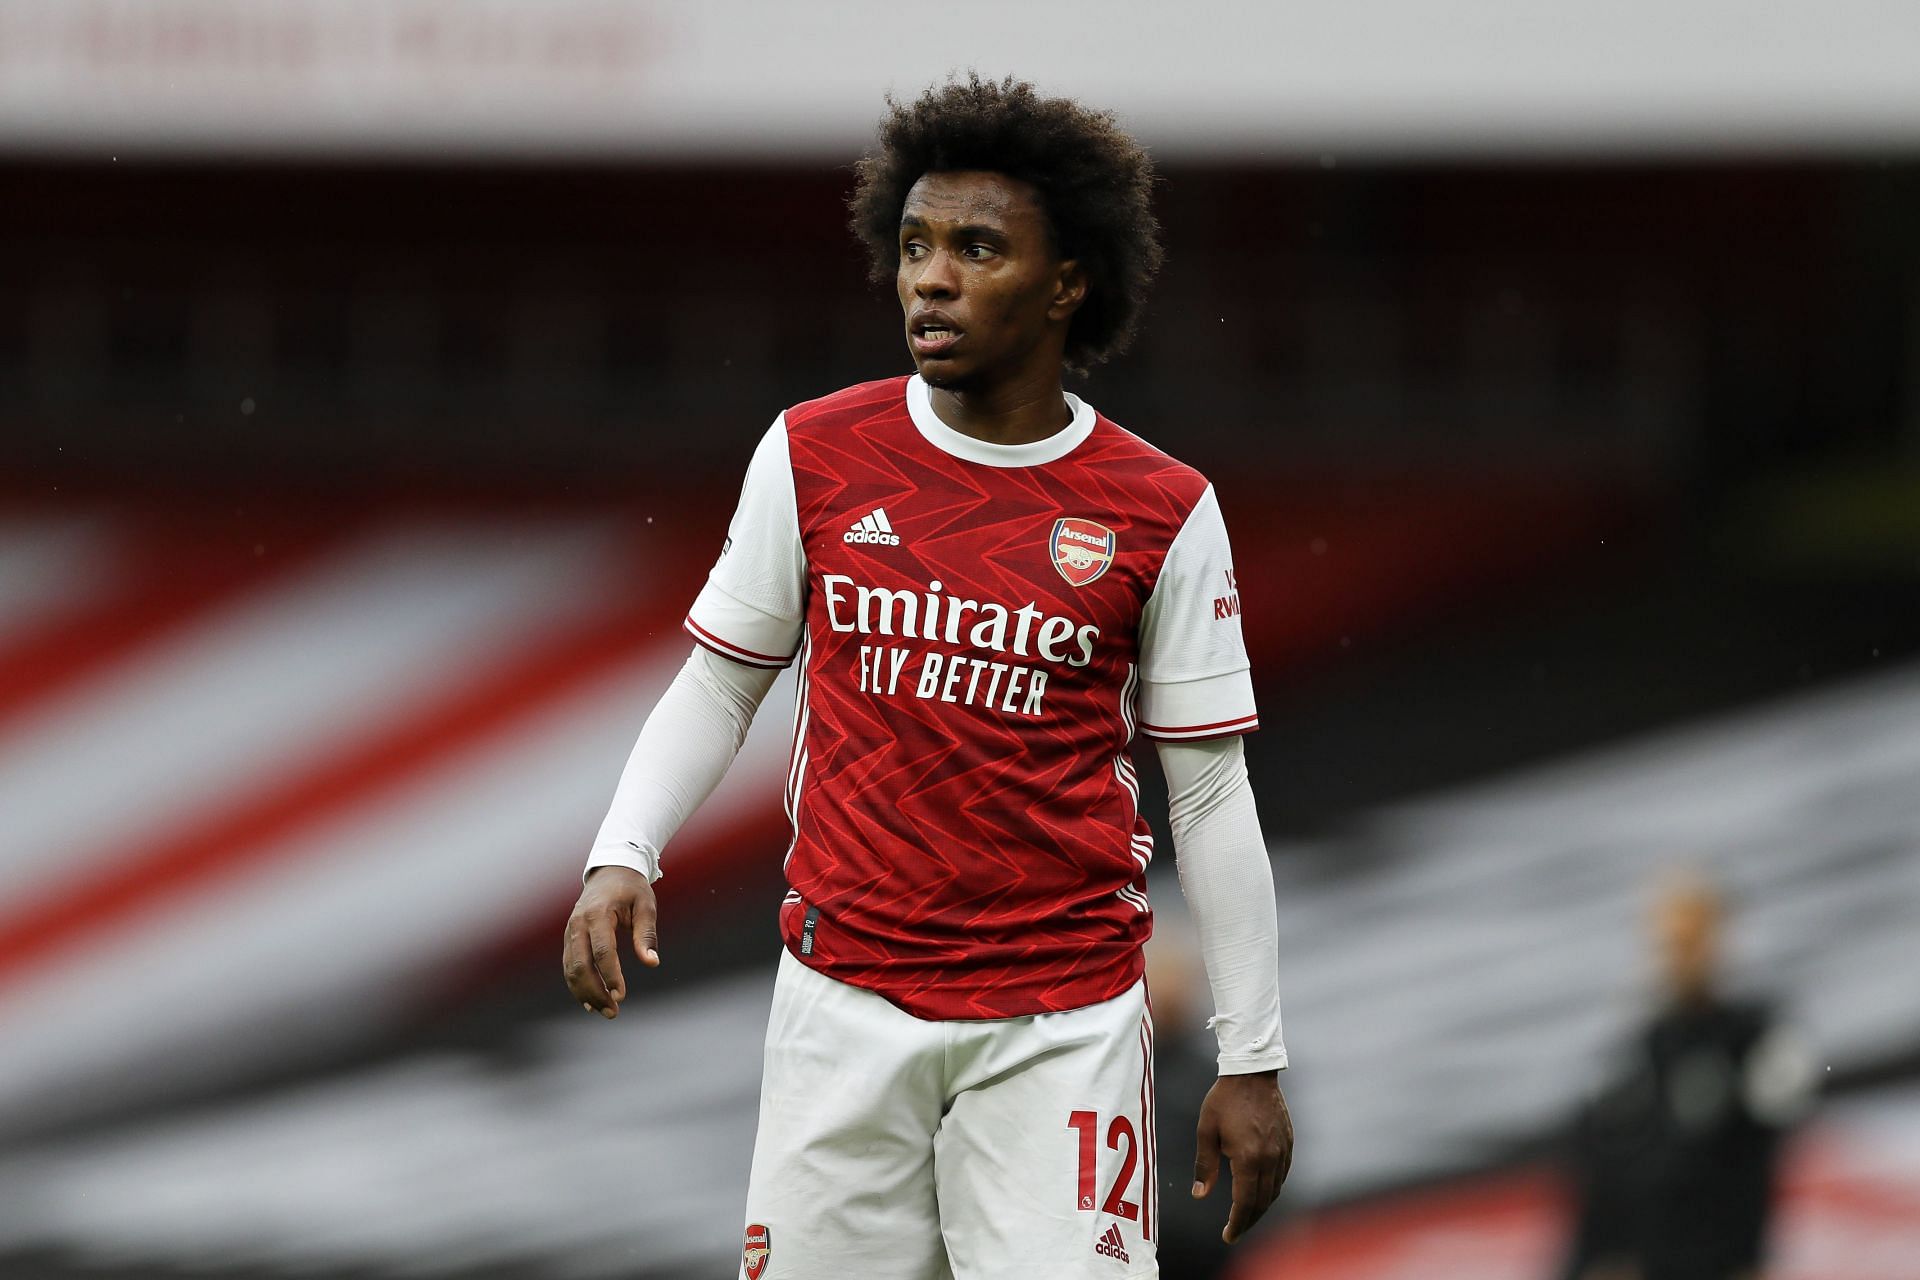 Despite being a free agent, Willian failed to make the most of his time with the Gunners